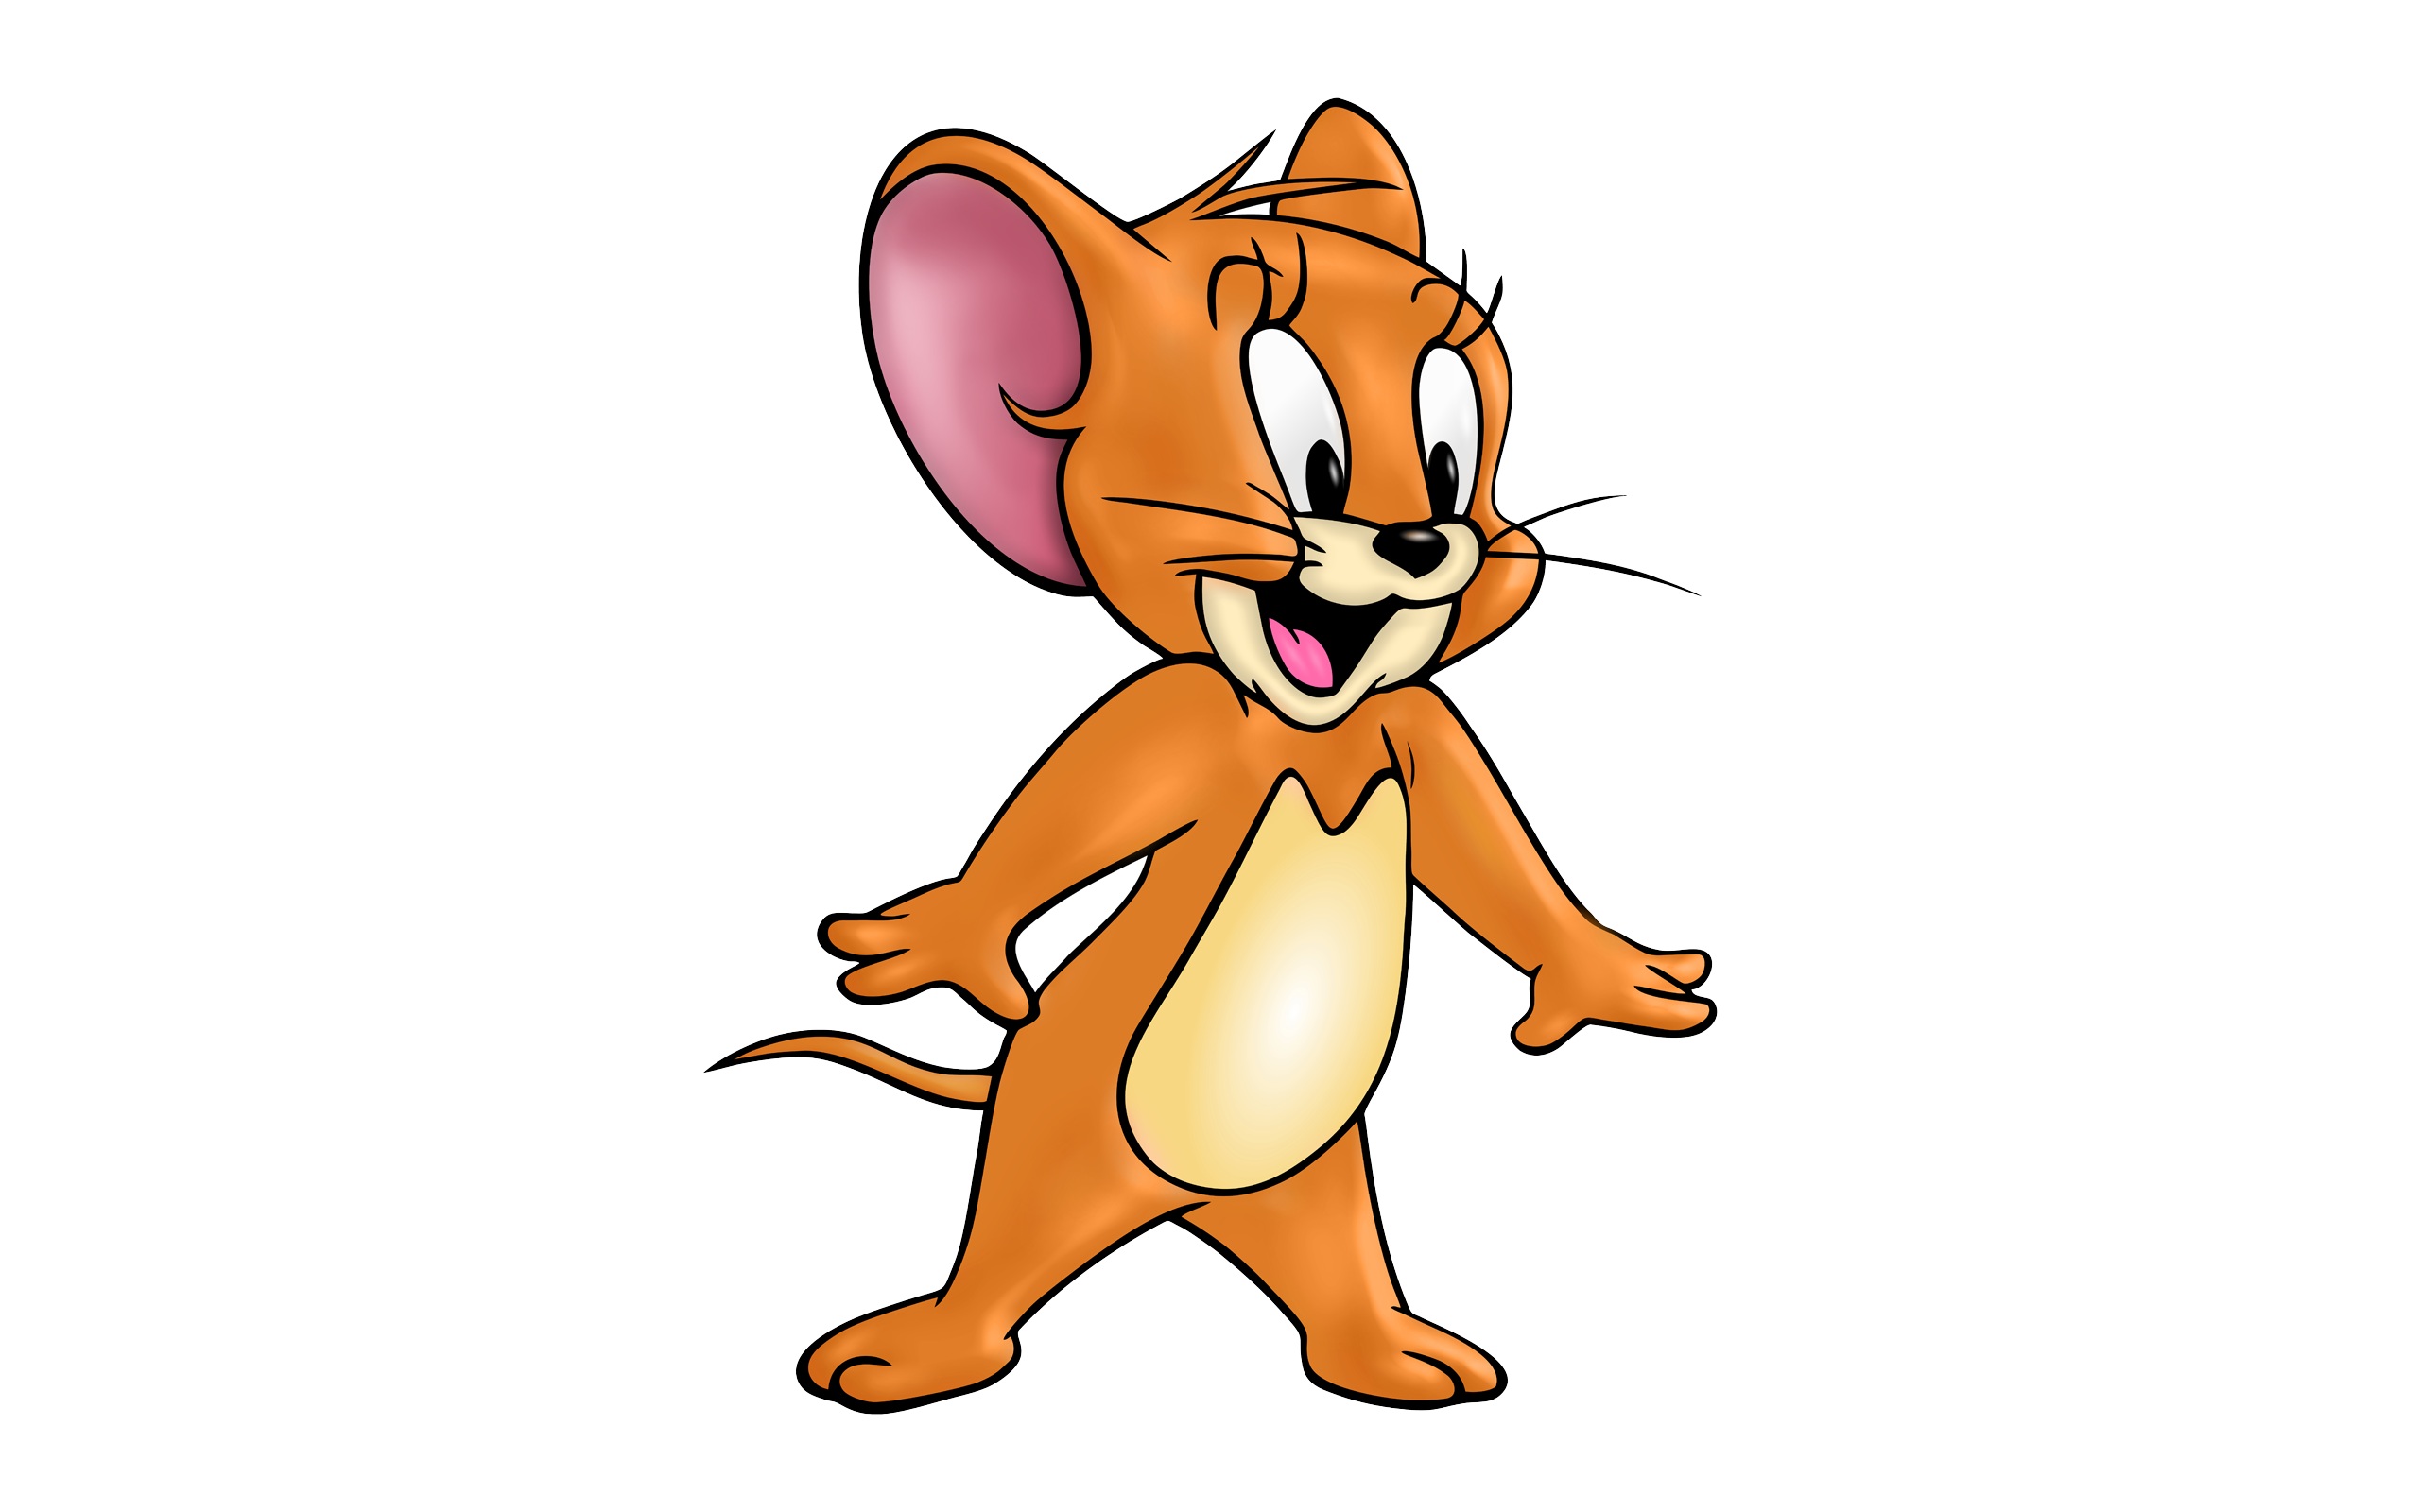 Jerry Mouse HD Wallpaper Download For Mobile 2560x1600, Wallpaper13.com